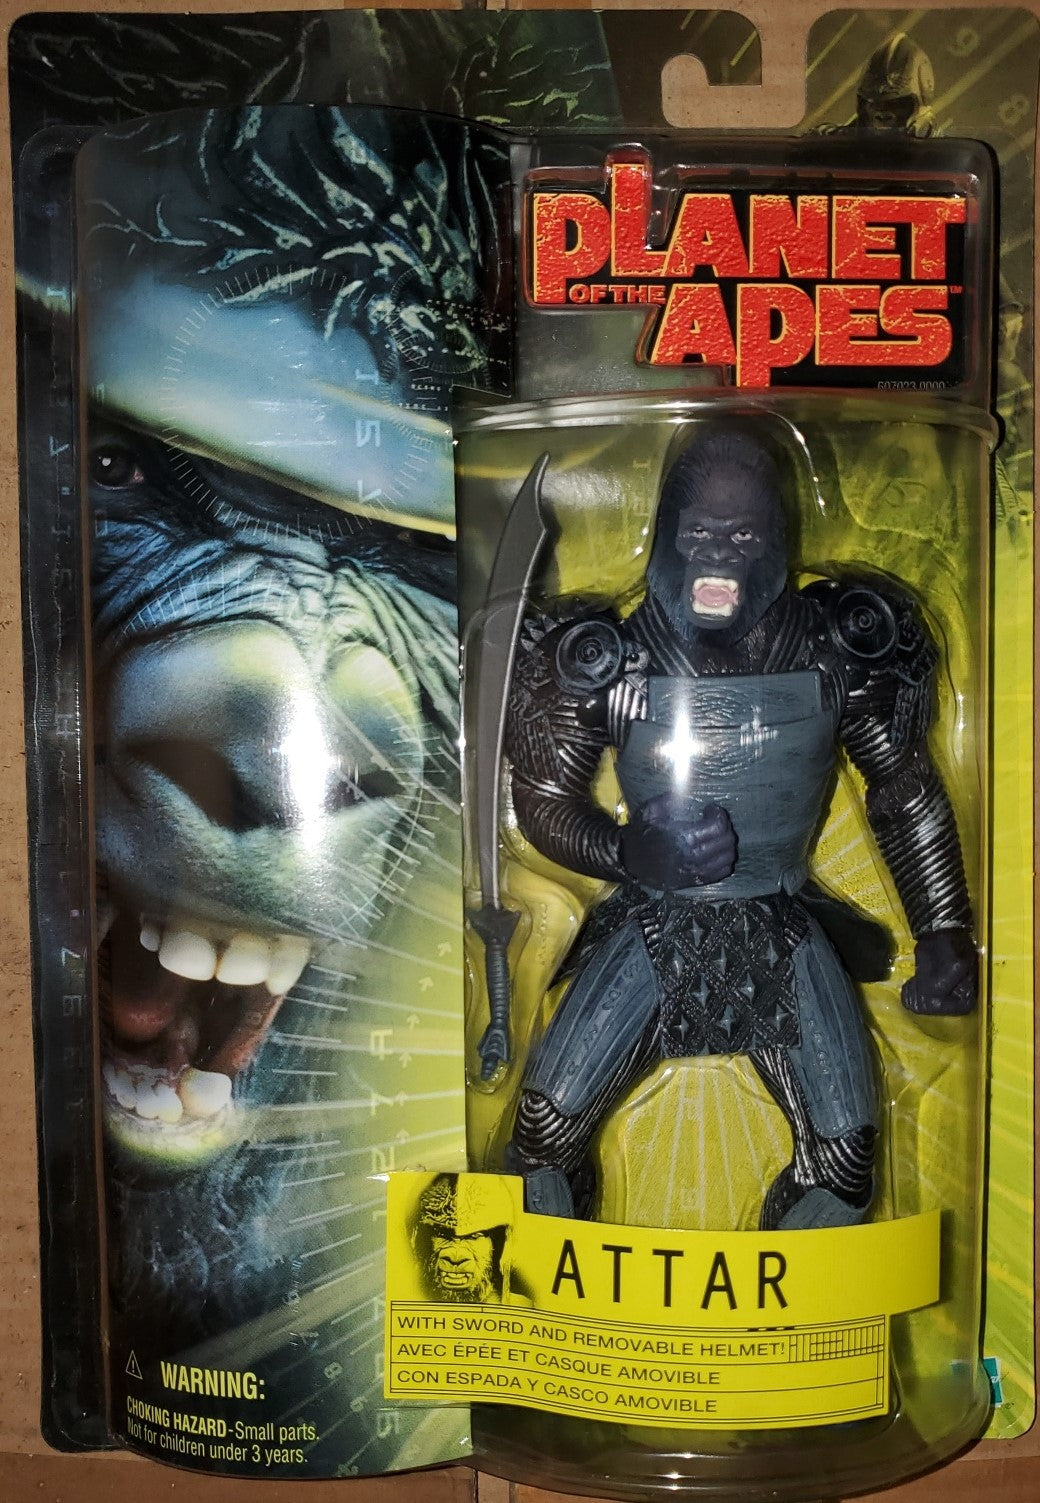 Planet of the Apes 2001 movie ATTAR action figure